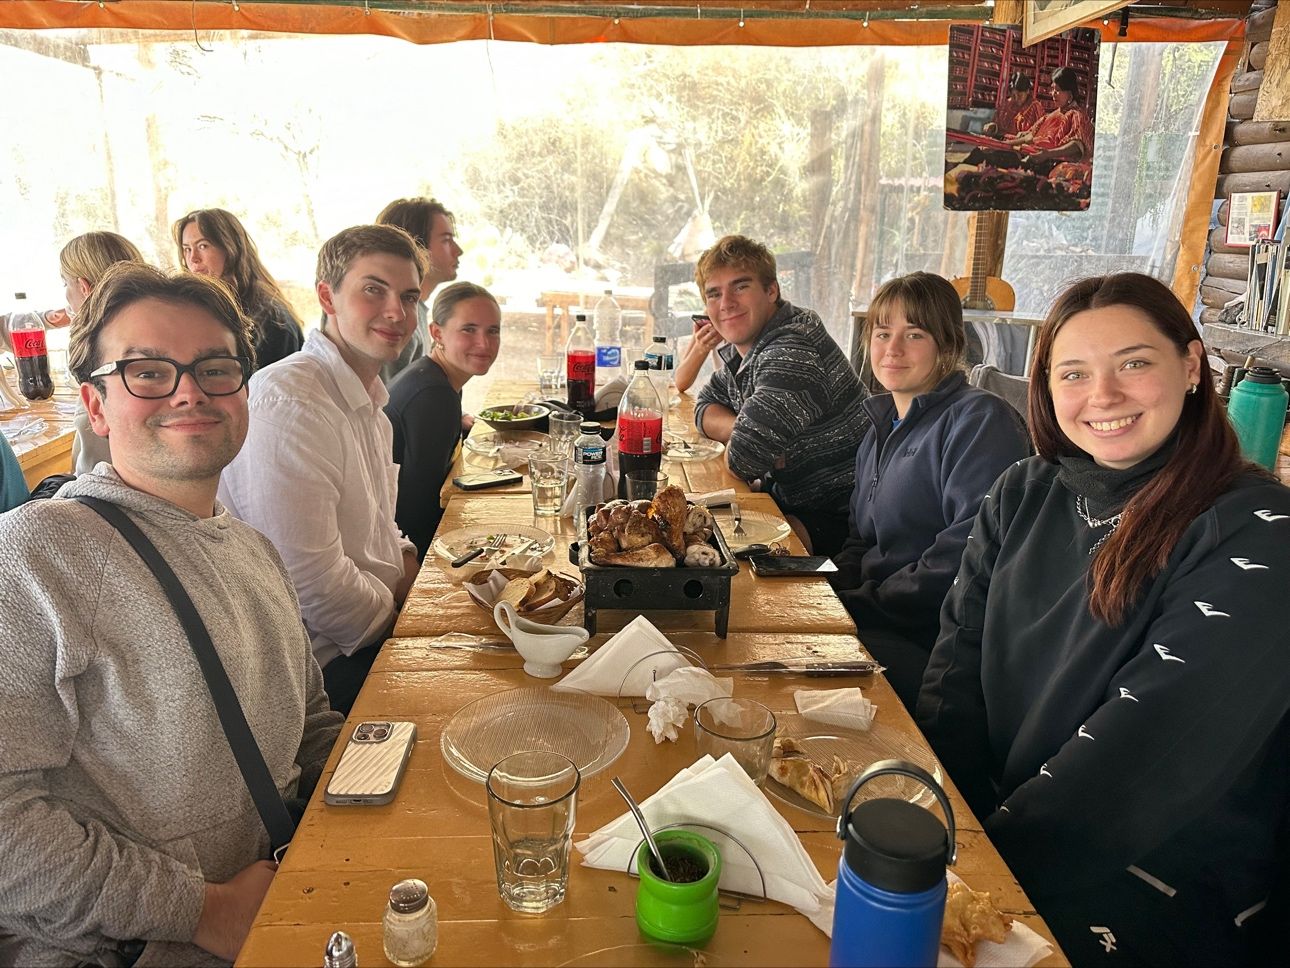 Belmont students enjoy meal while on study abroad trip in Mendoza, Argentina